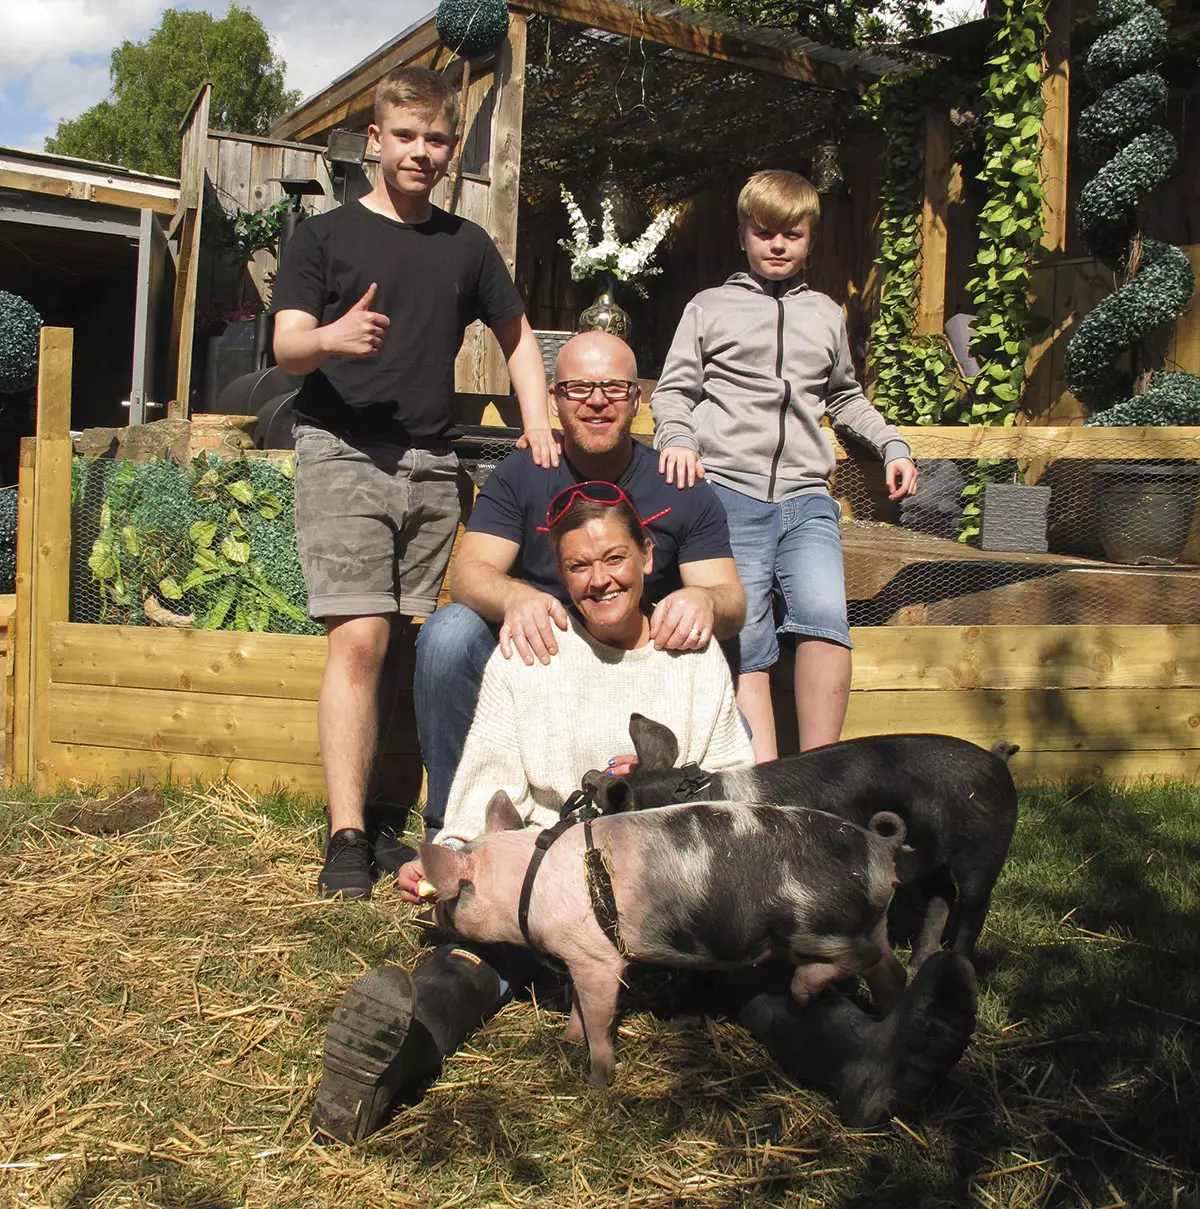 Meat The Family will challenge four meat-eating families to care for a farm animal, before being asked to either send it for slaughter or commit to being veggie. (